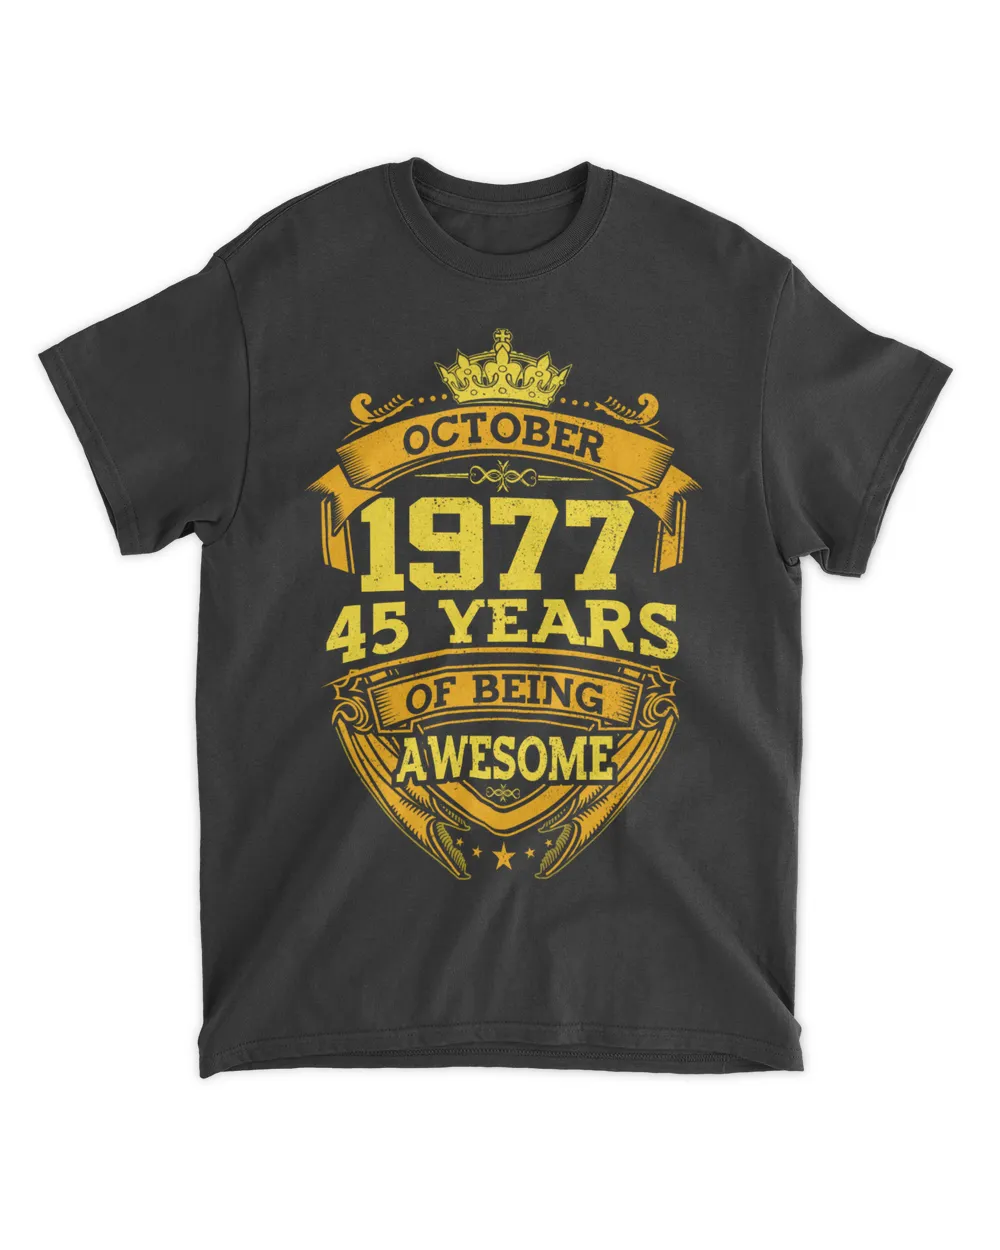 Vintage 1977 T shirt - October 1977 45 Years Of Being Awesome Shirt